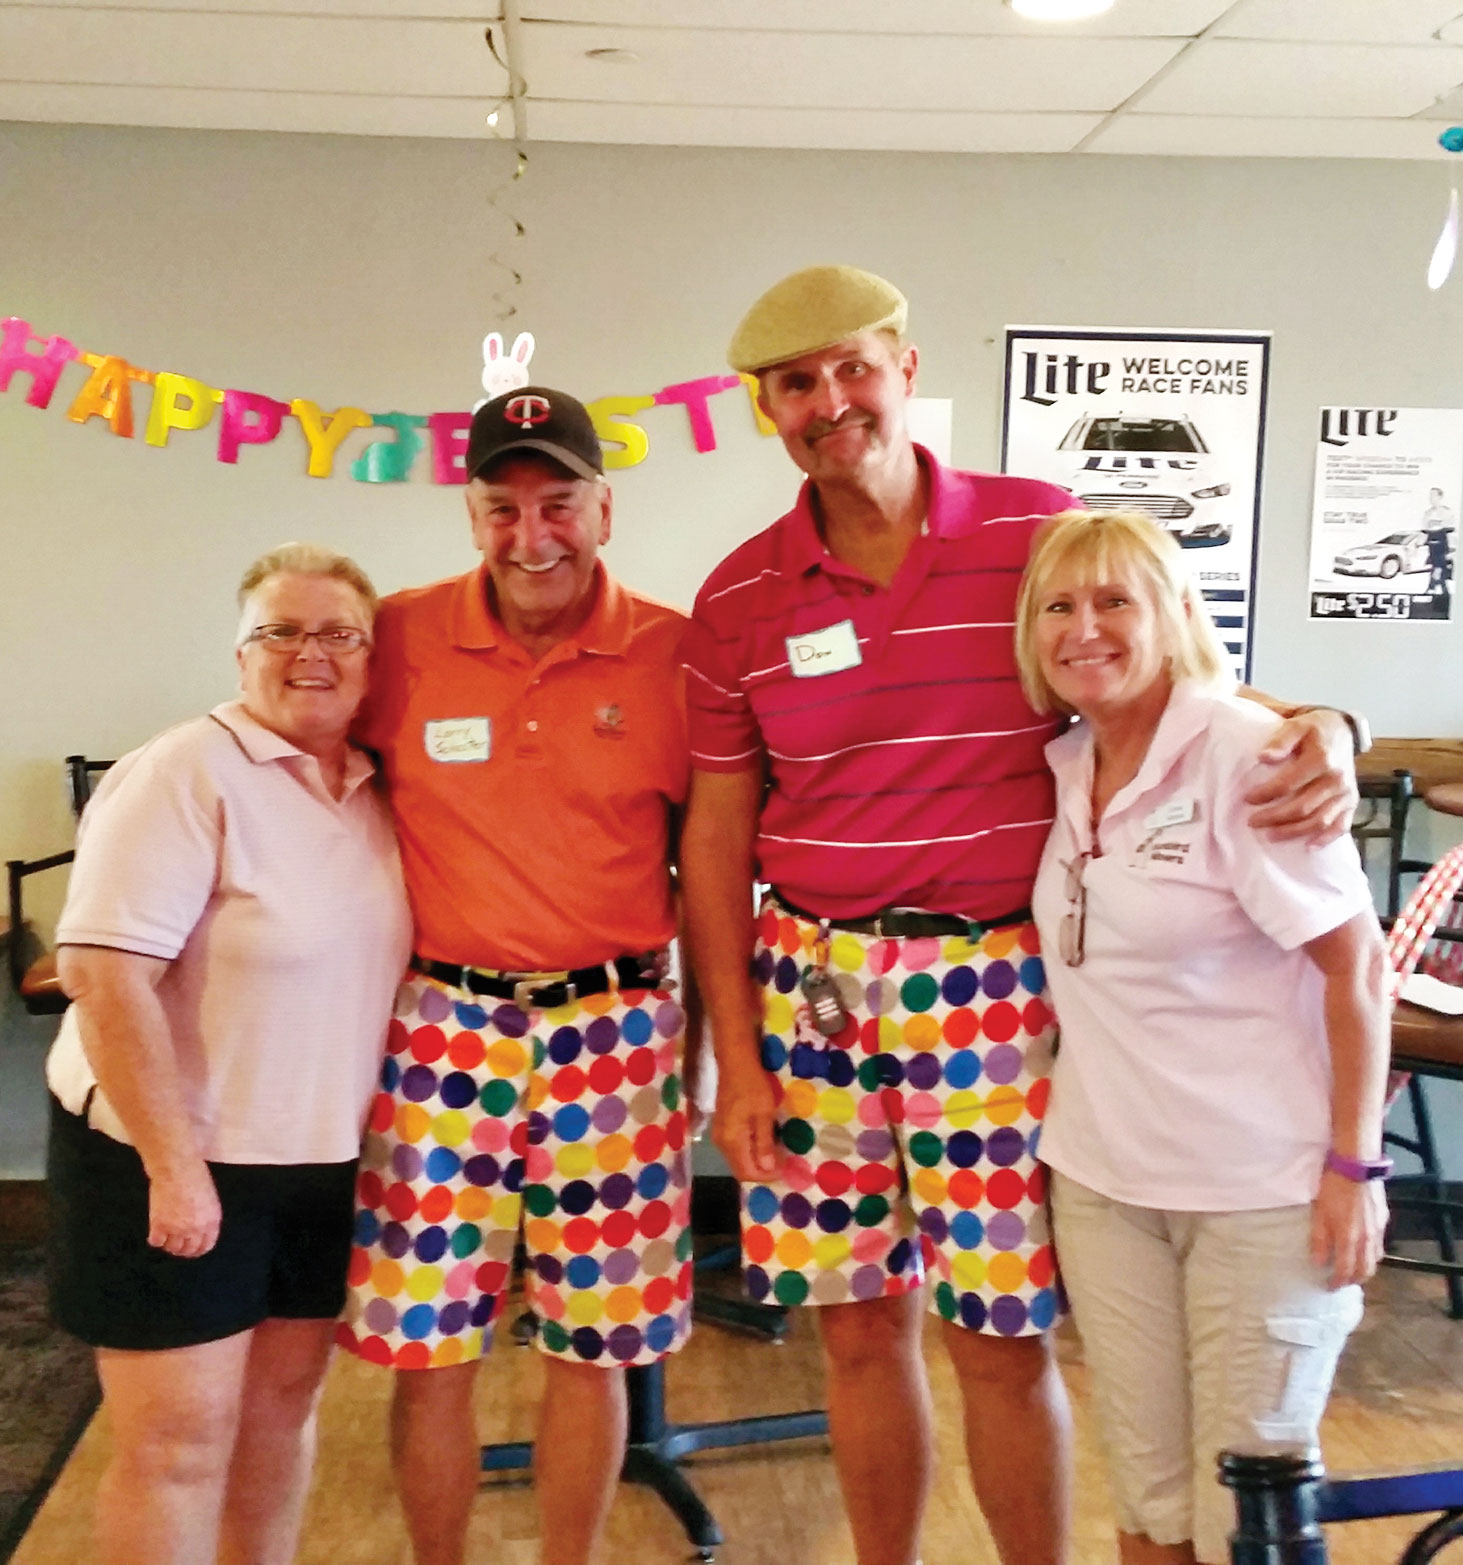 Pictured are Kerry Schuster, Larry Schuster, Don Kleinow and Donna Kleinow. Larry and Don’s wild shorts may have helped their game, since their teams had the best scores.